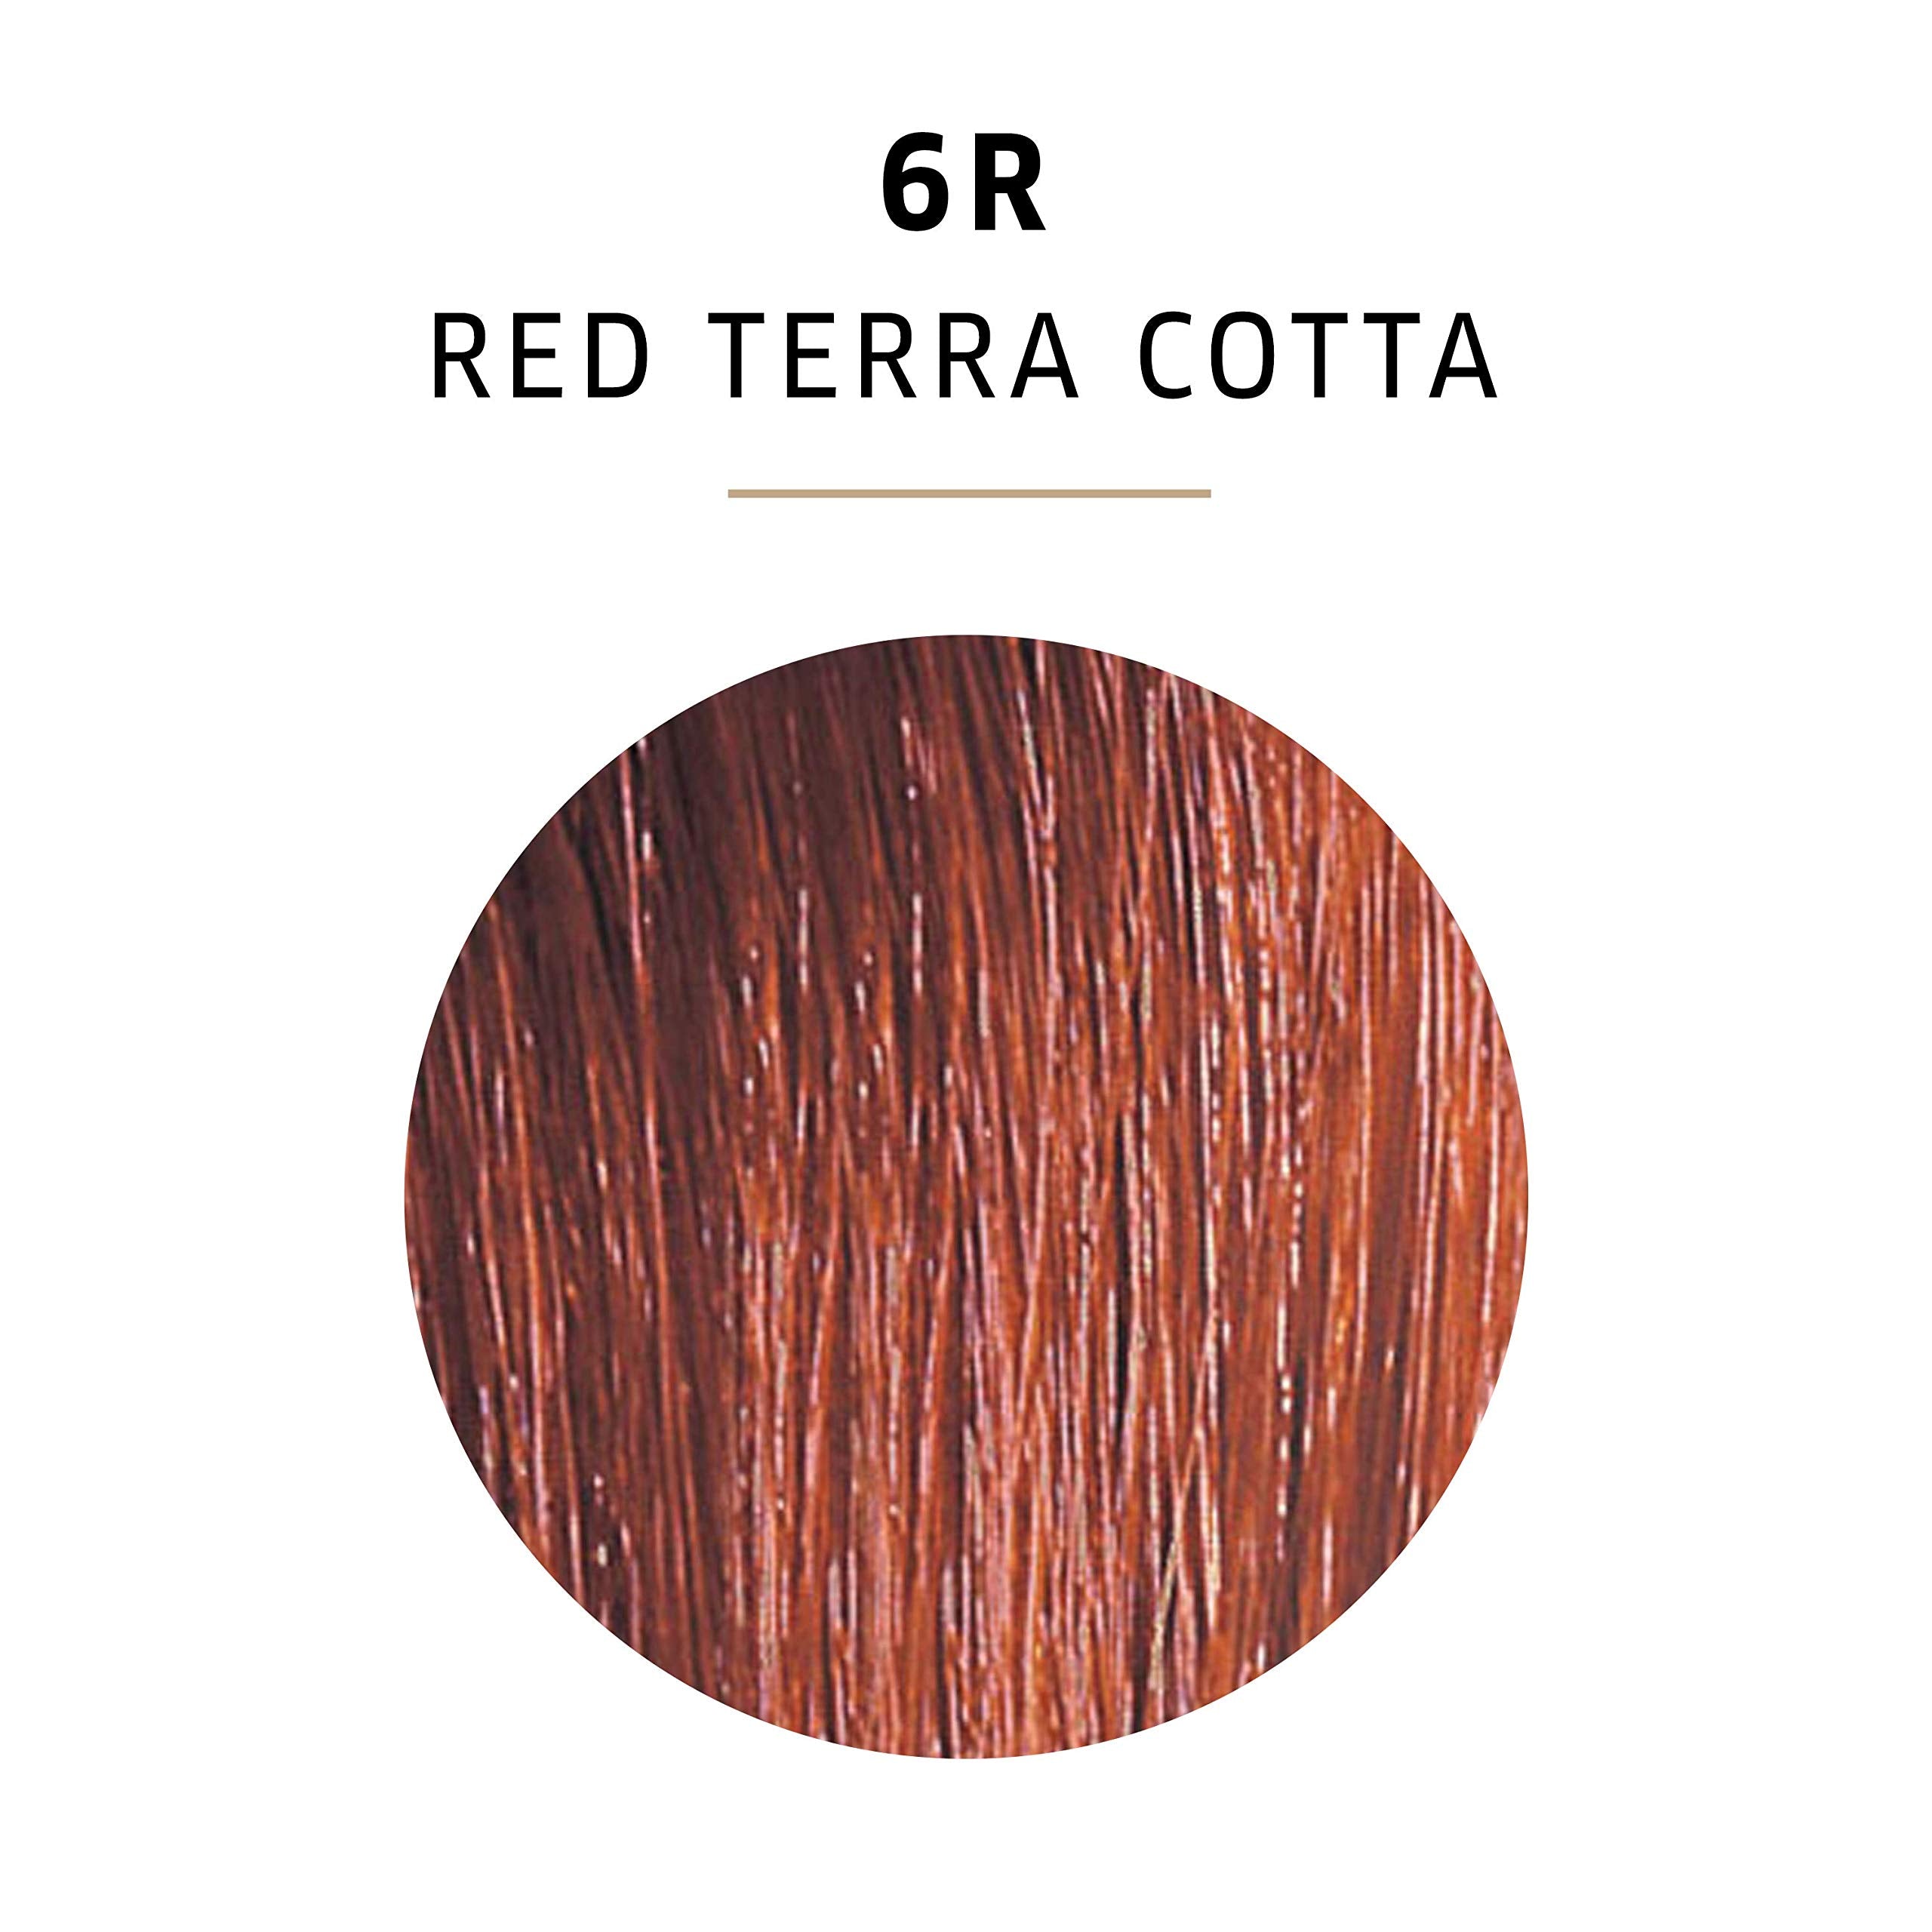 Wella ColorCharm Permanent Gel Hair Color, 6R Red Terra Cotta